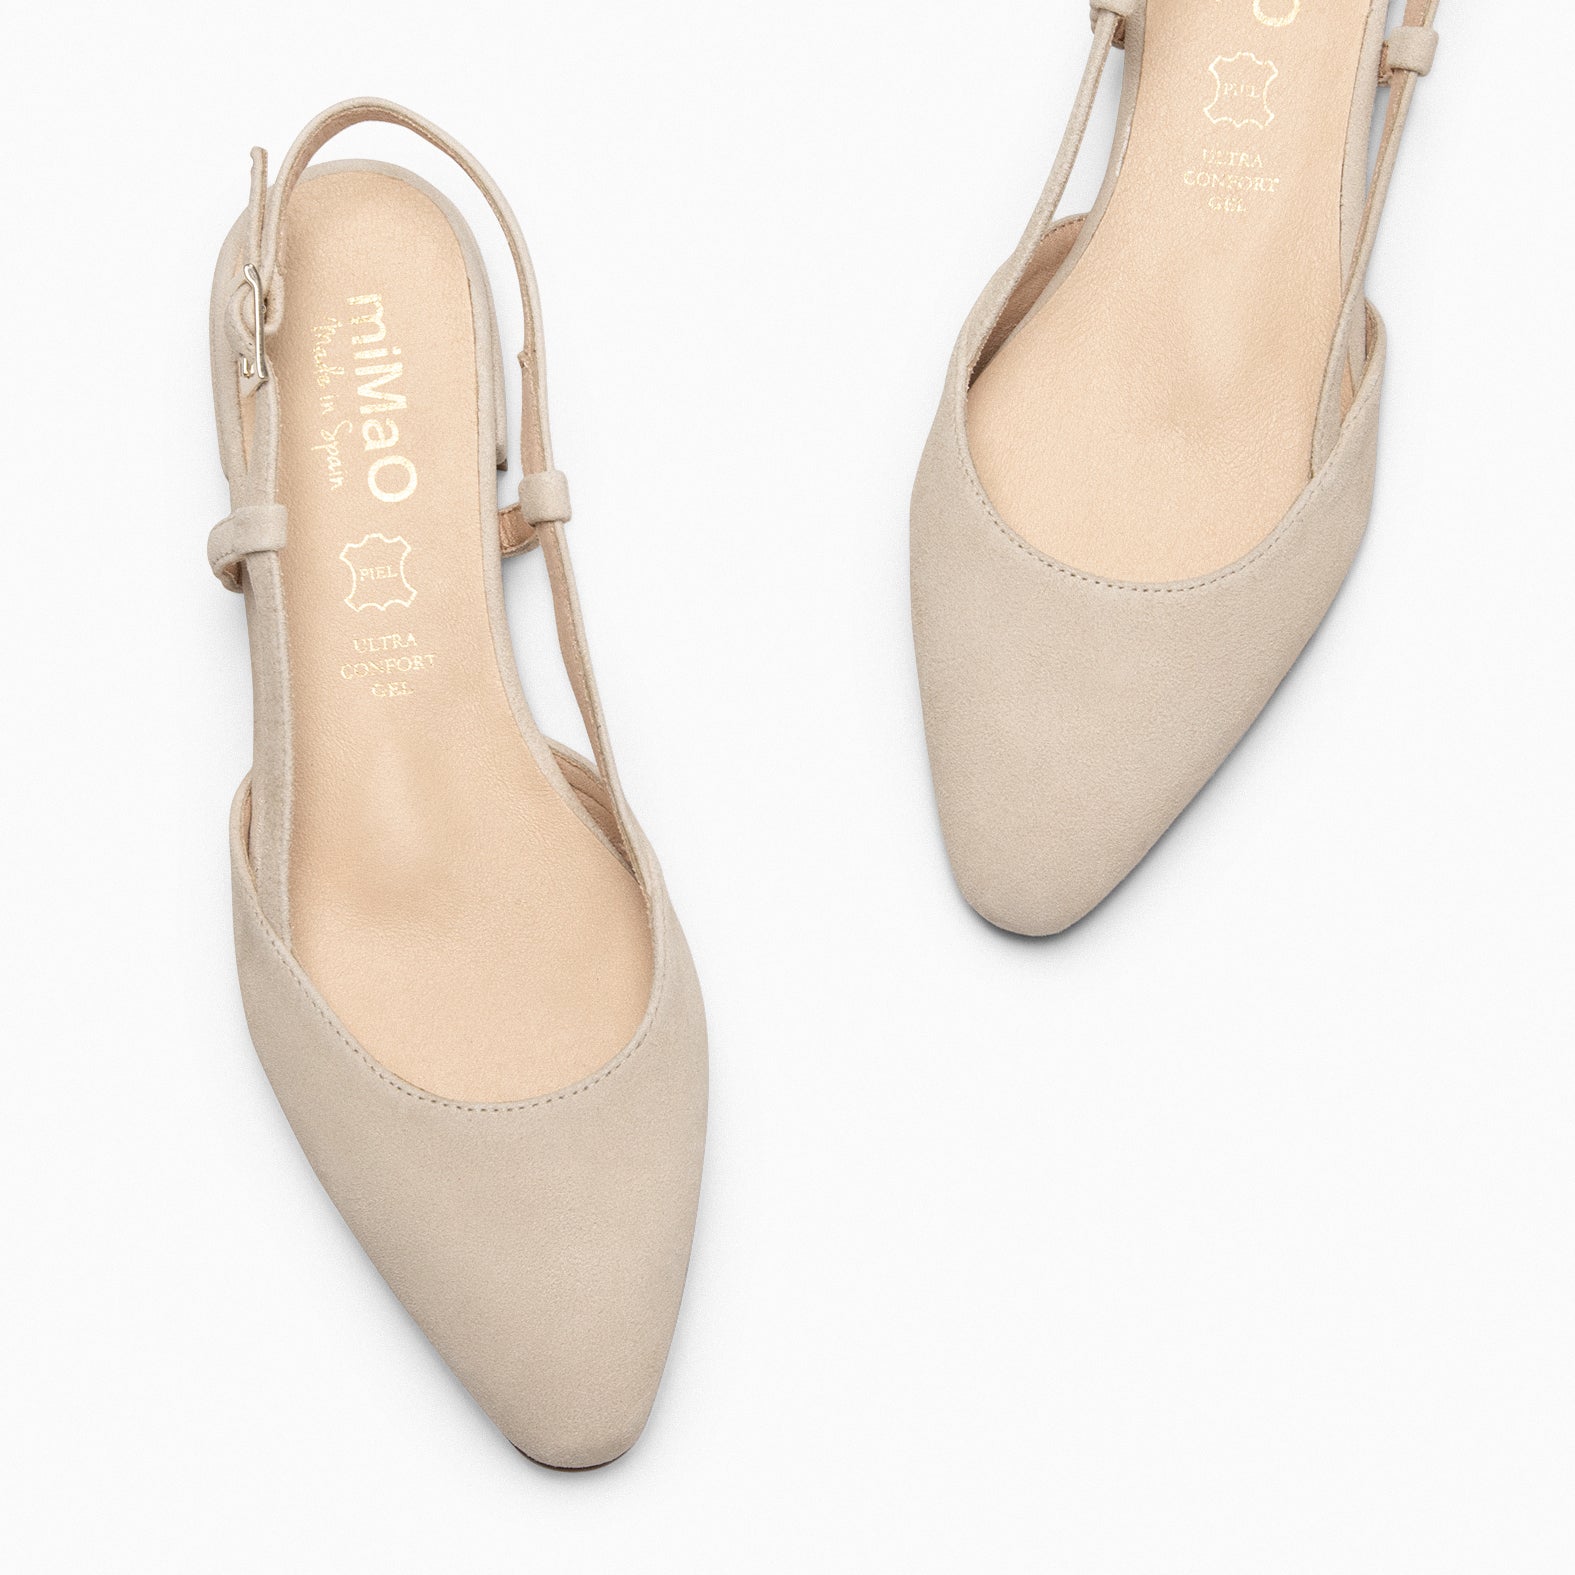 BRUNCH – Chaussures Slingbacks plates TAUPE